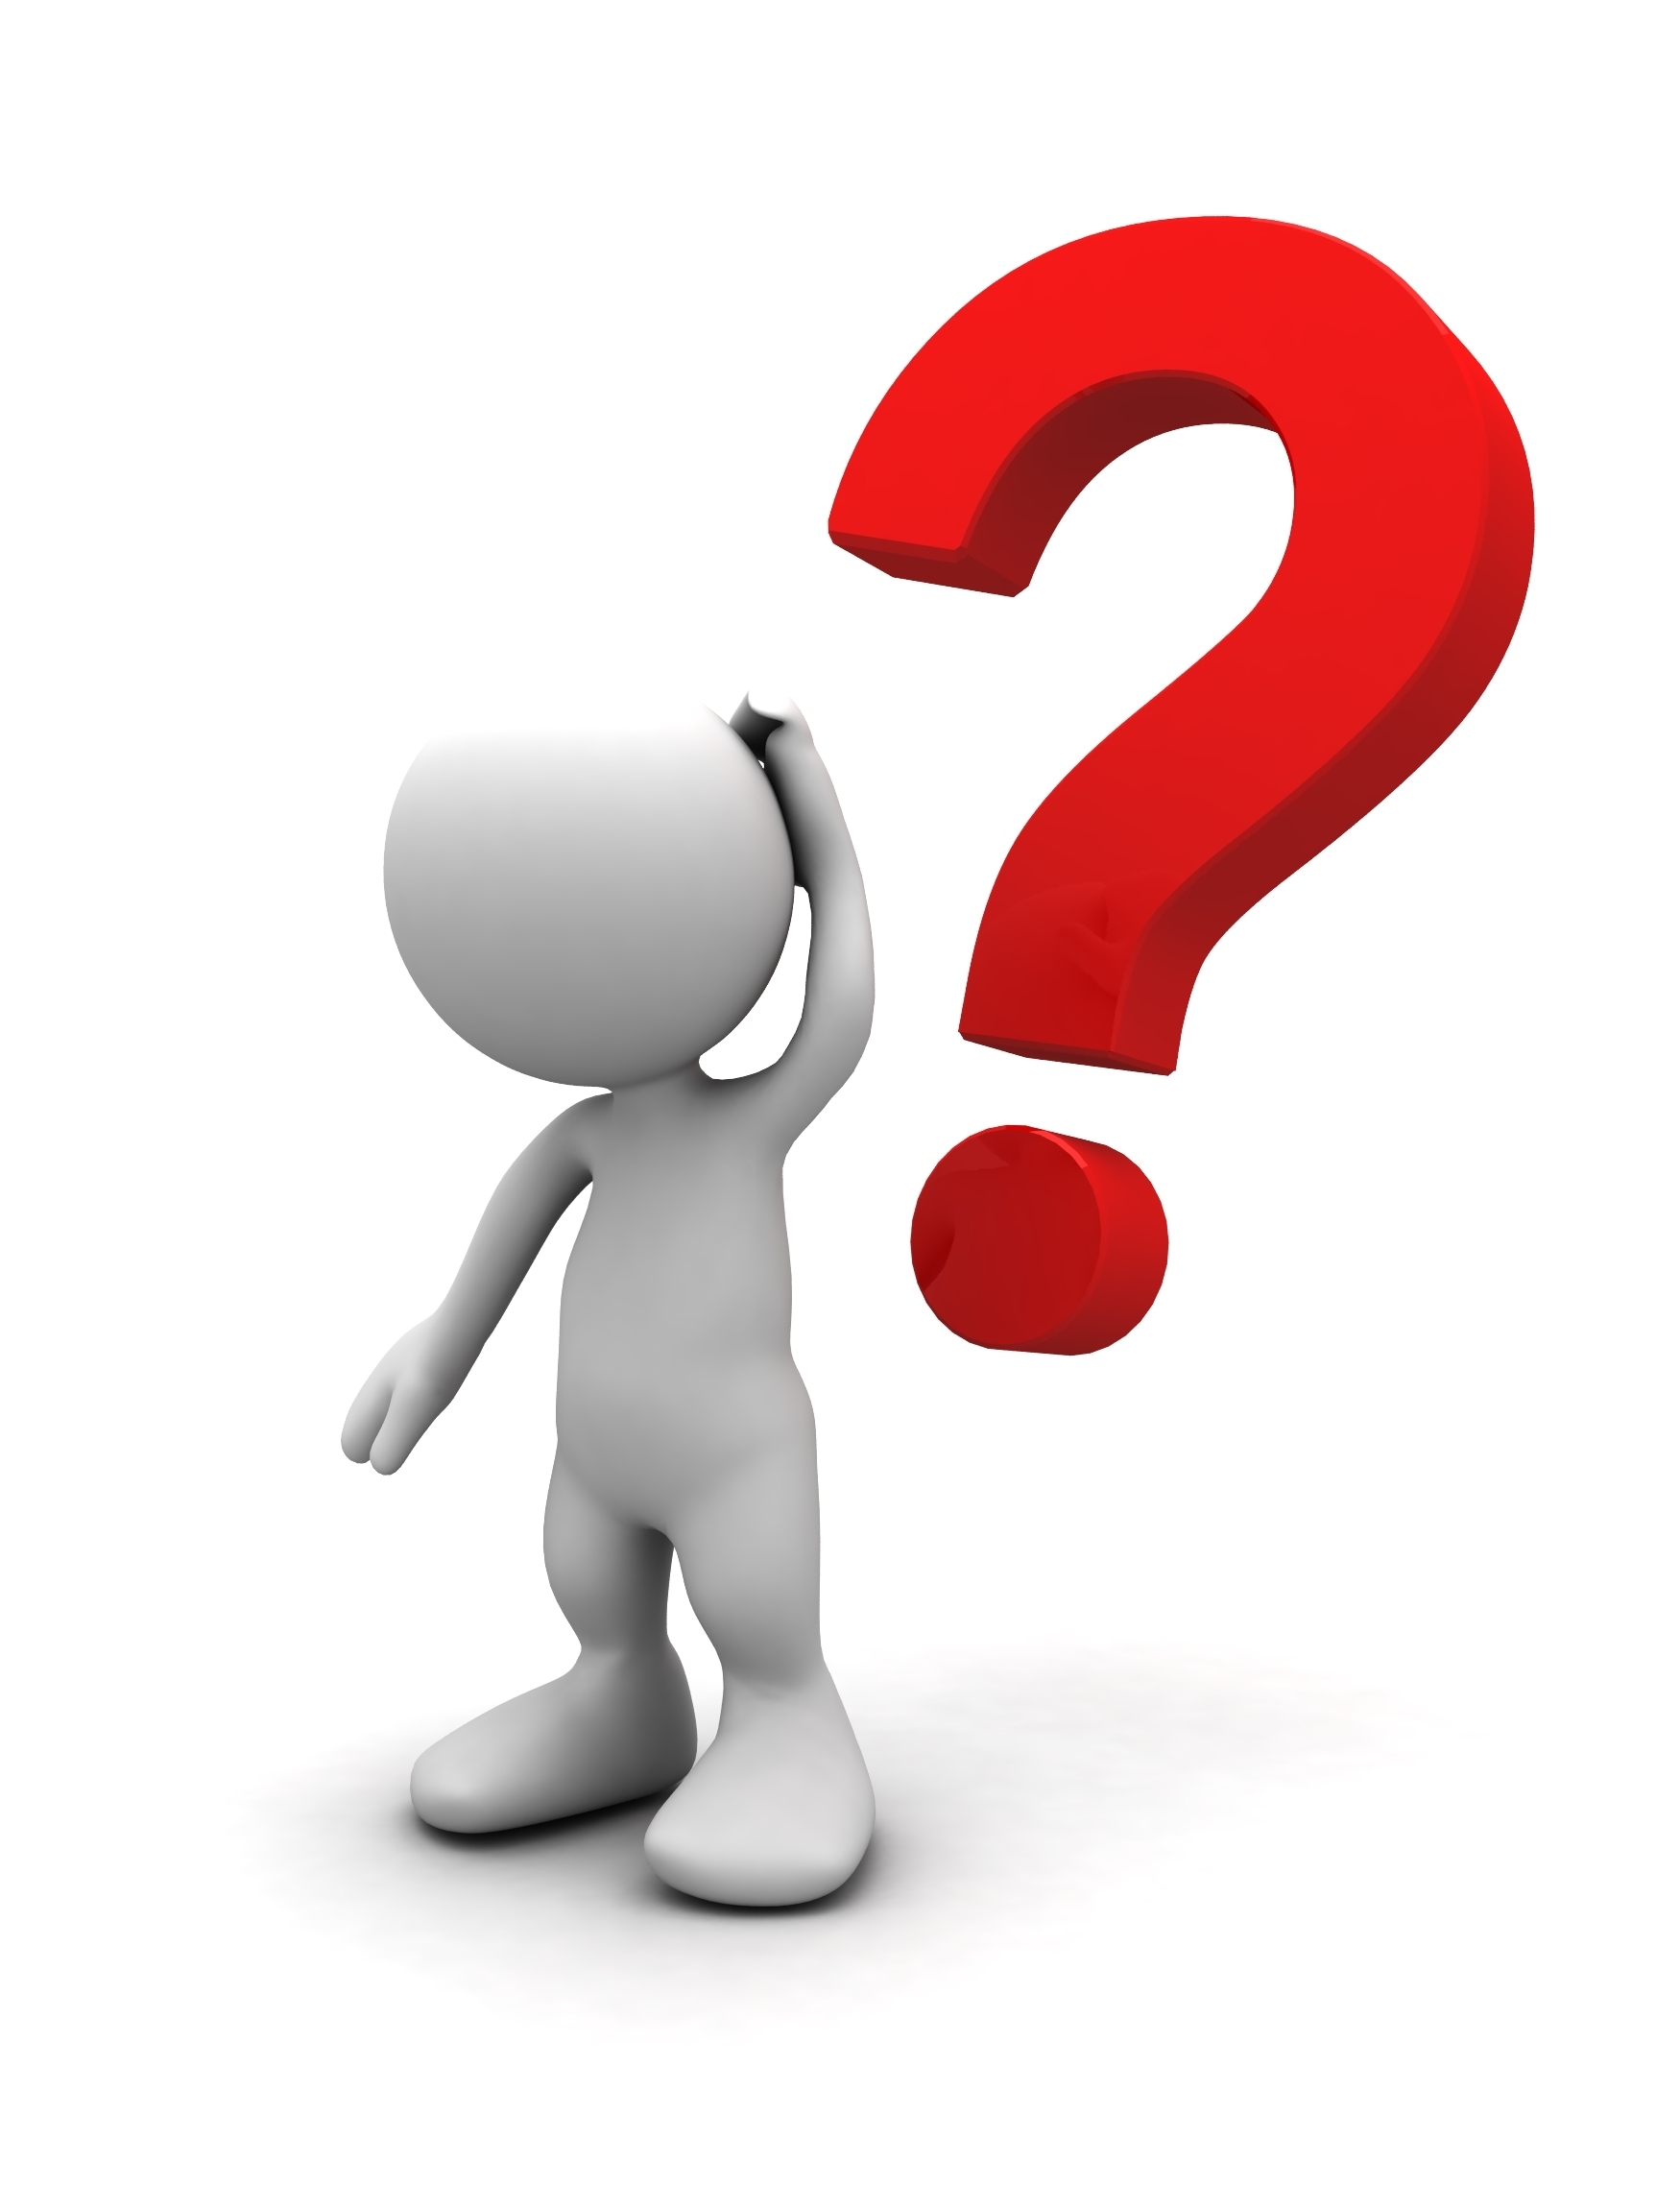 Image of person figure with question mark